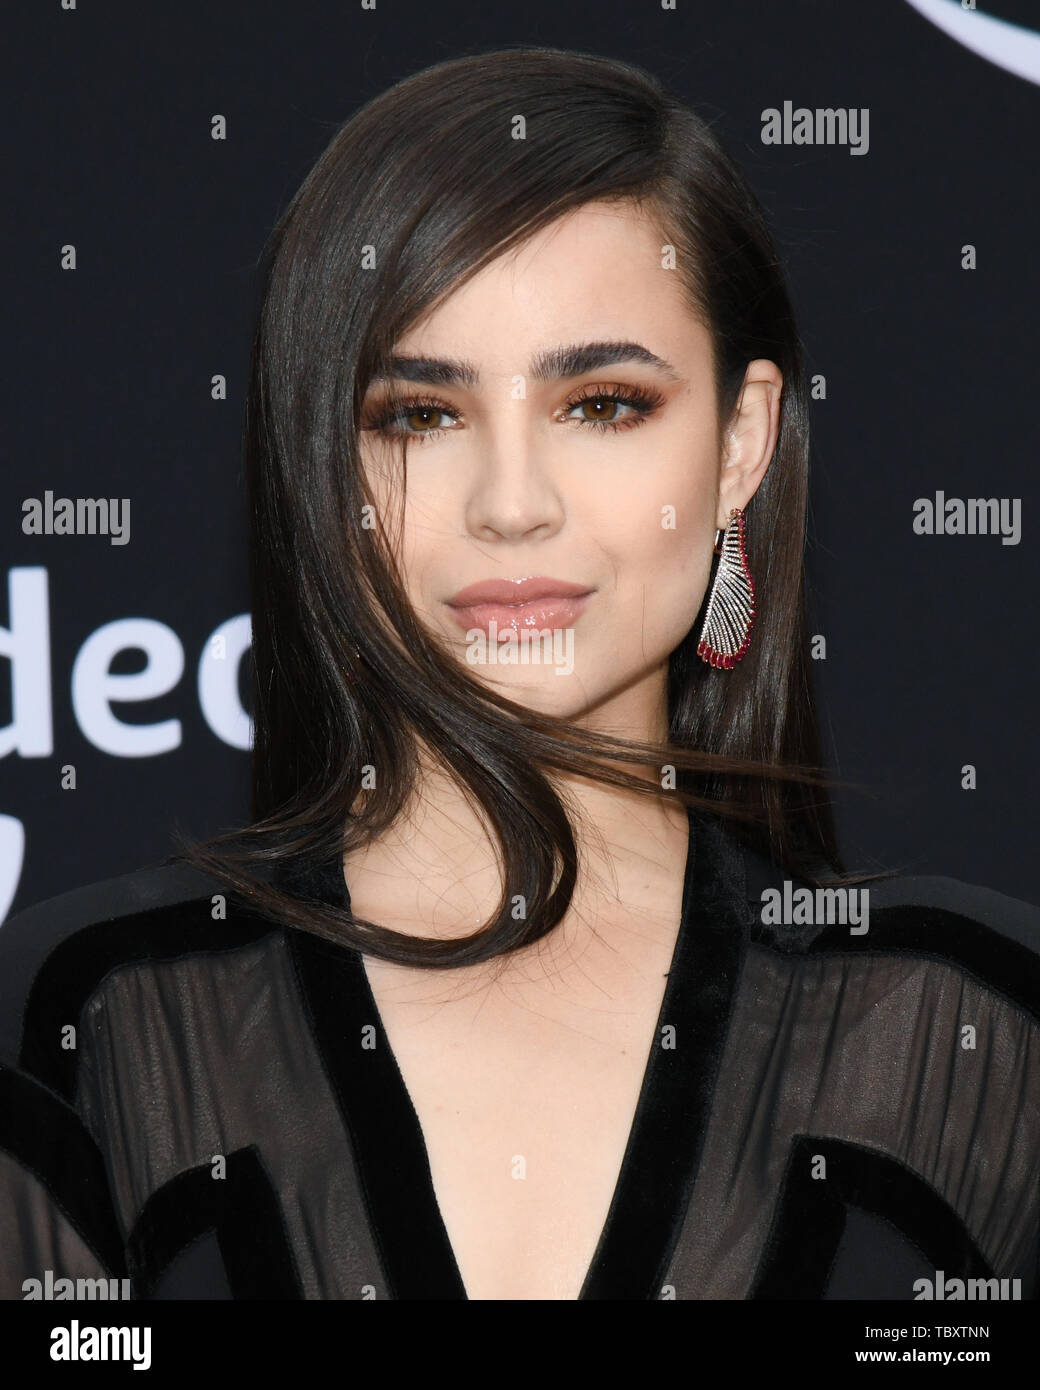 June 3, 2019 - Westwood, California, USA - 02, June 2019 - Westwood Village, California. Sofia Carson attends Premiere Of Amazon Prime Video's 'Chasing Happiness' at the Regency Village Bruin Theatre. (Credit Image: © Billy Bennight/ZUMA Wire) Stock Photo